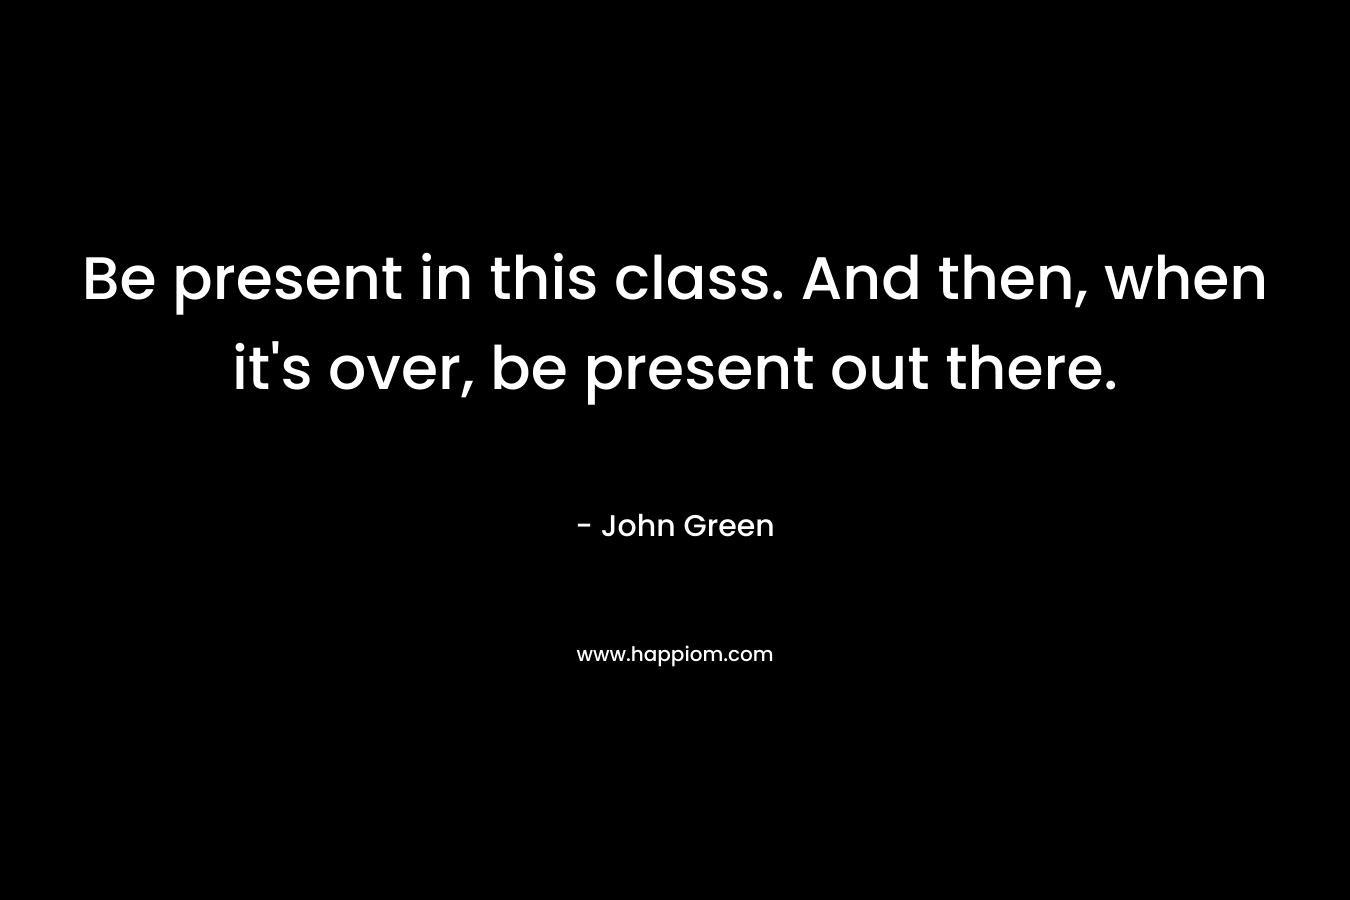 Be present in this class. And then, when it’s over, be present out there. – John Green